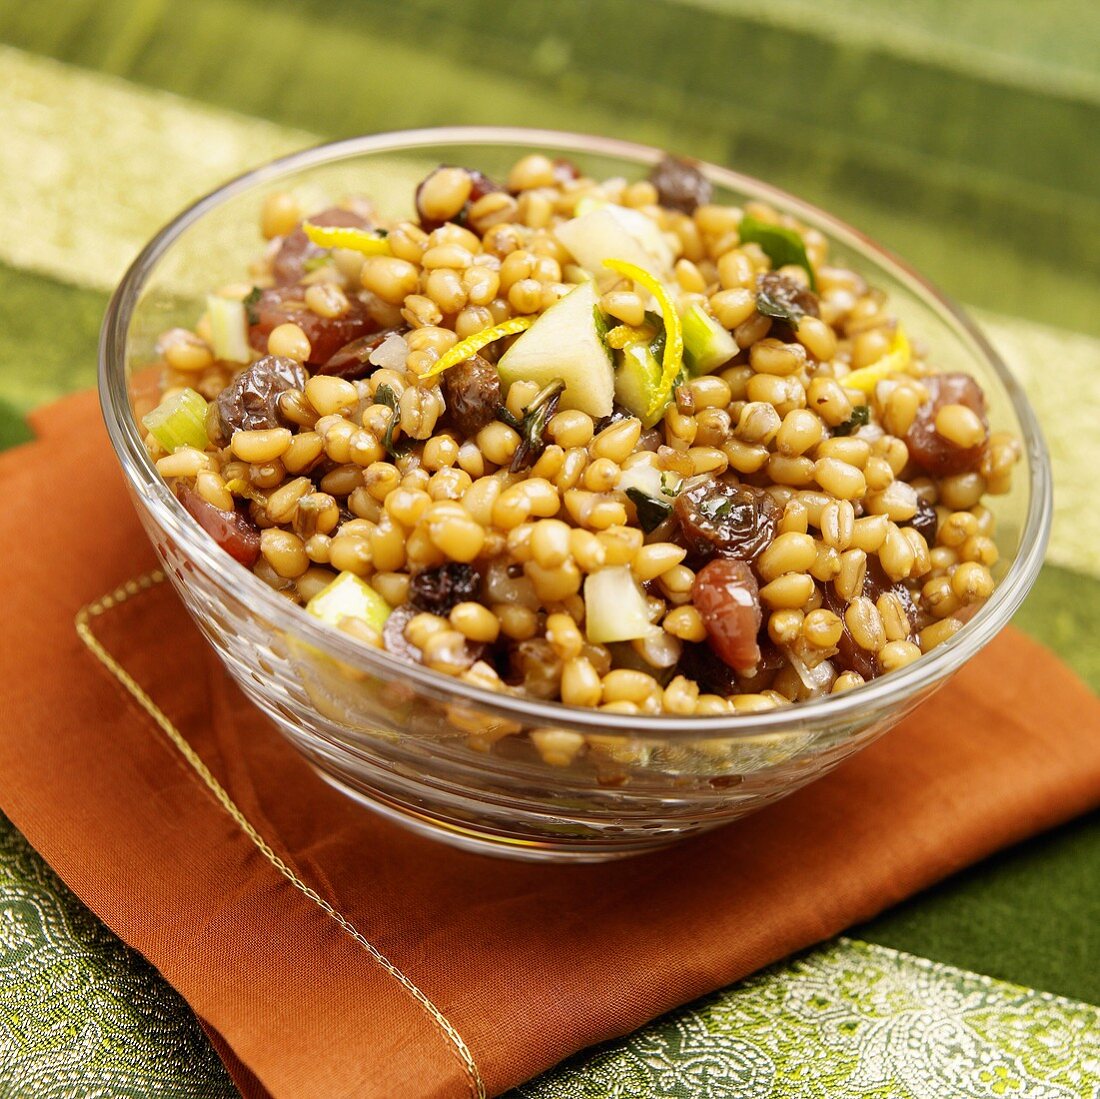 A bowl of pearl barley with dried fruit